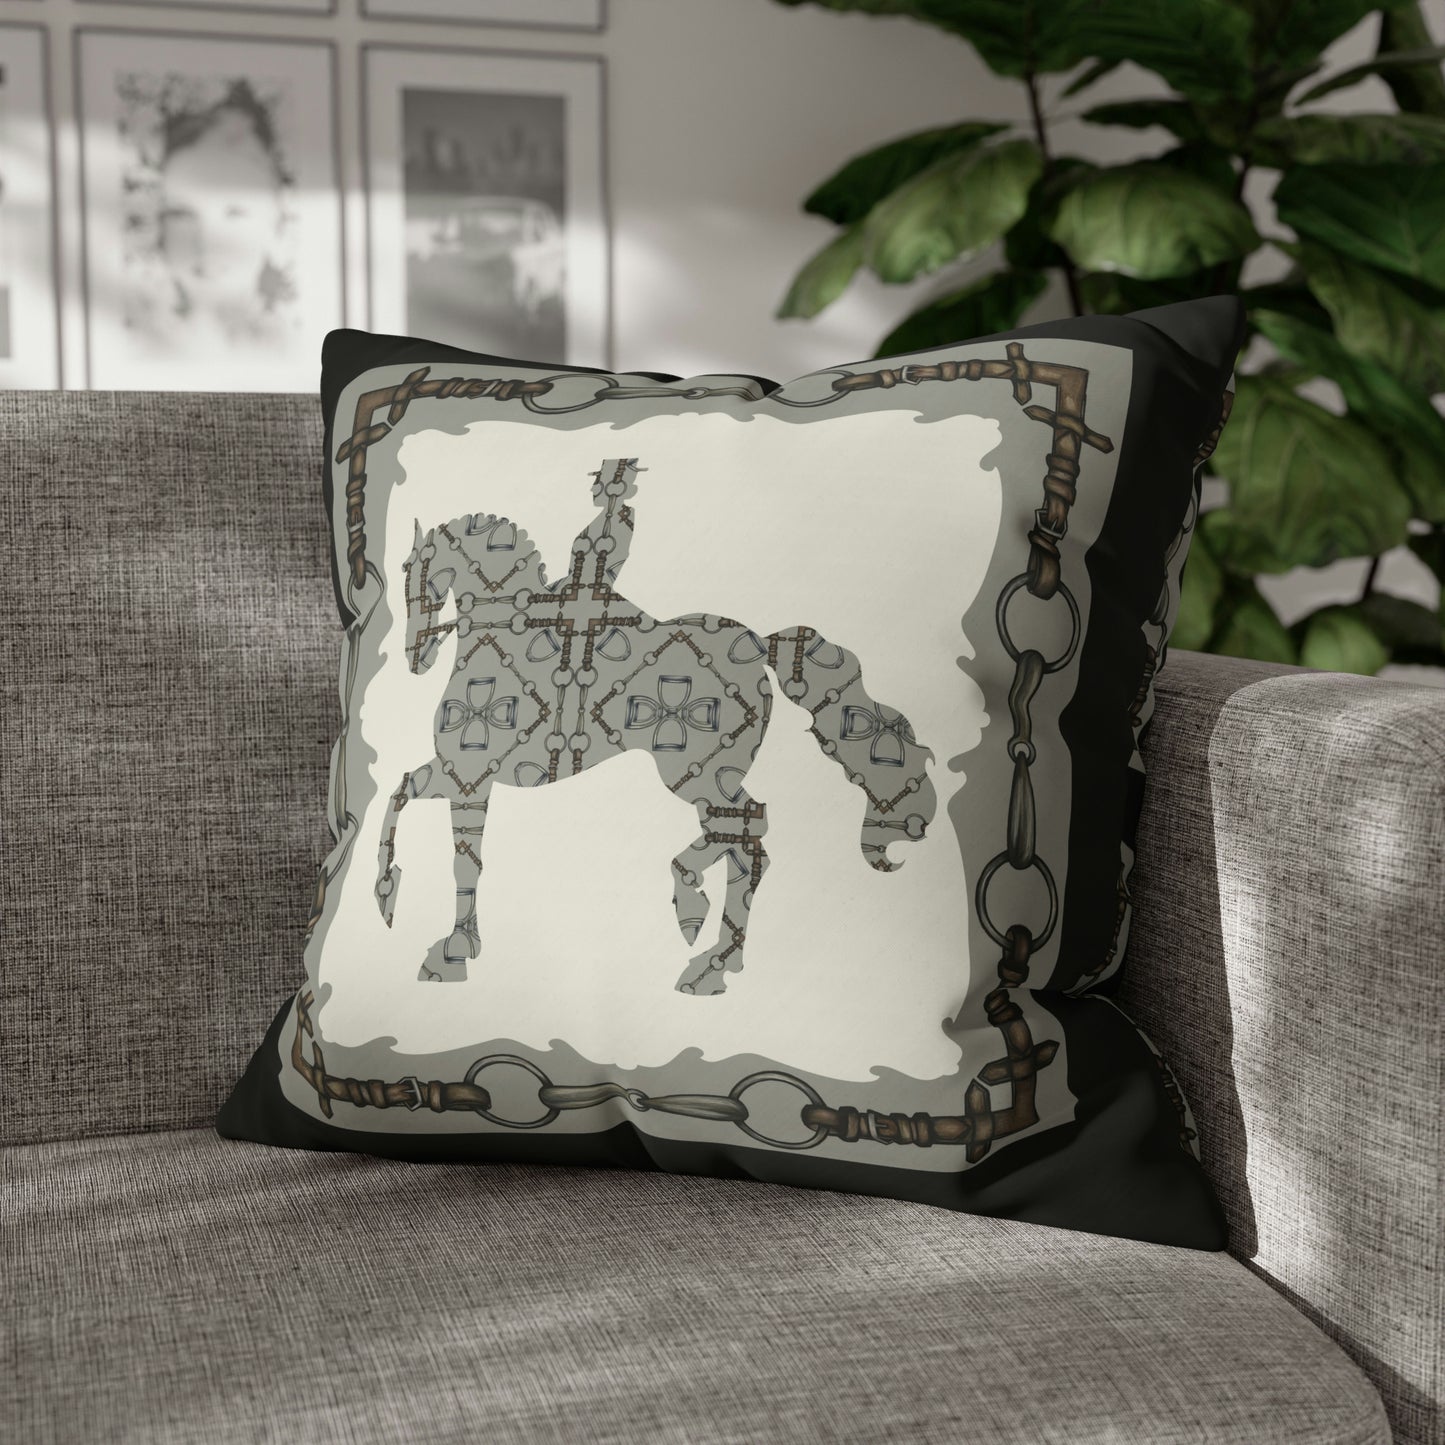 Double Sided Dressage Piaffe Horse Snaffle Bit and Reins Pattern Polyester Pillowcase